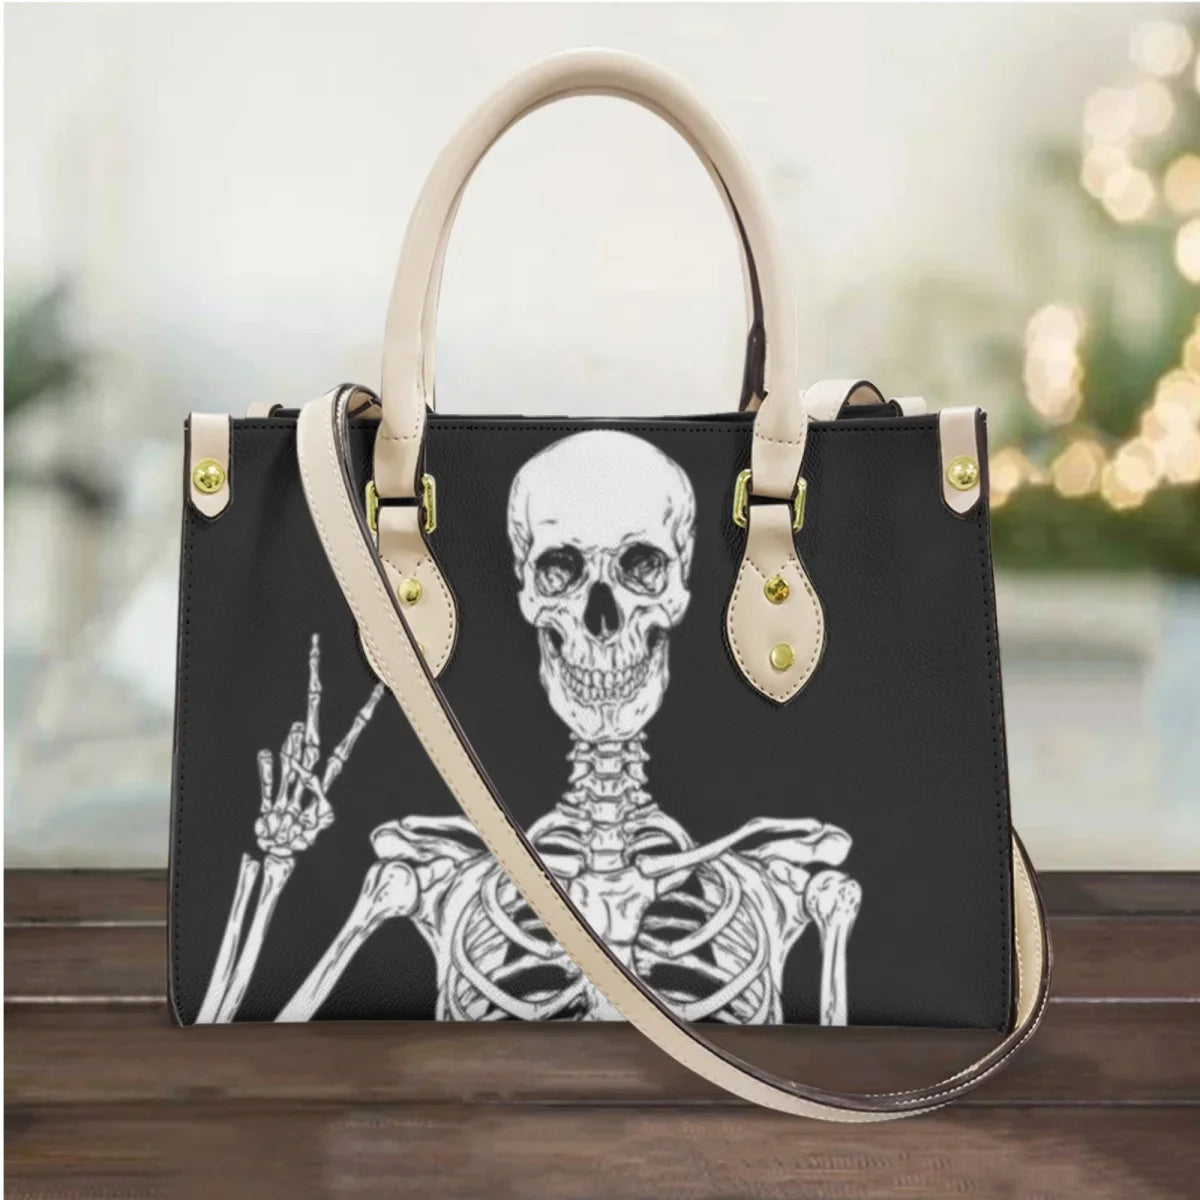 Skull Women Handbags Luxury Leather Black Cross Body Bags for Female Hand Bag and Purse Top-handle Casual Messenger Bags Mujer